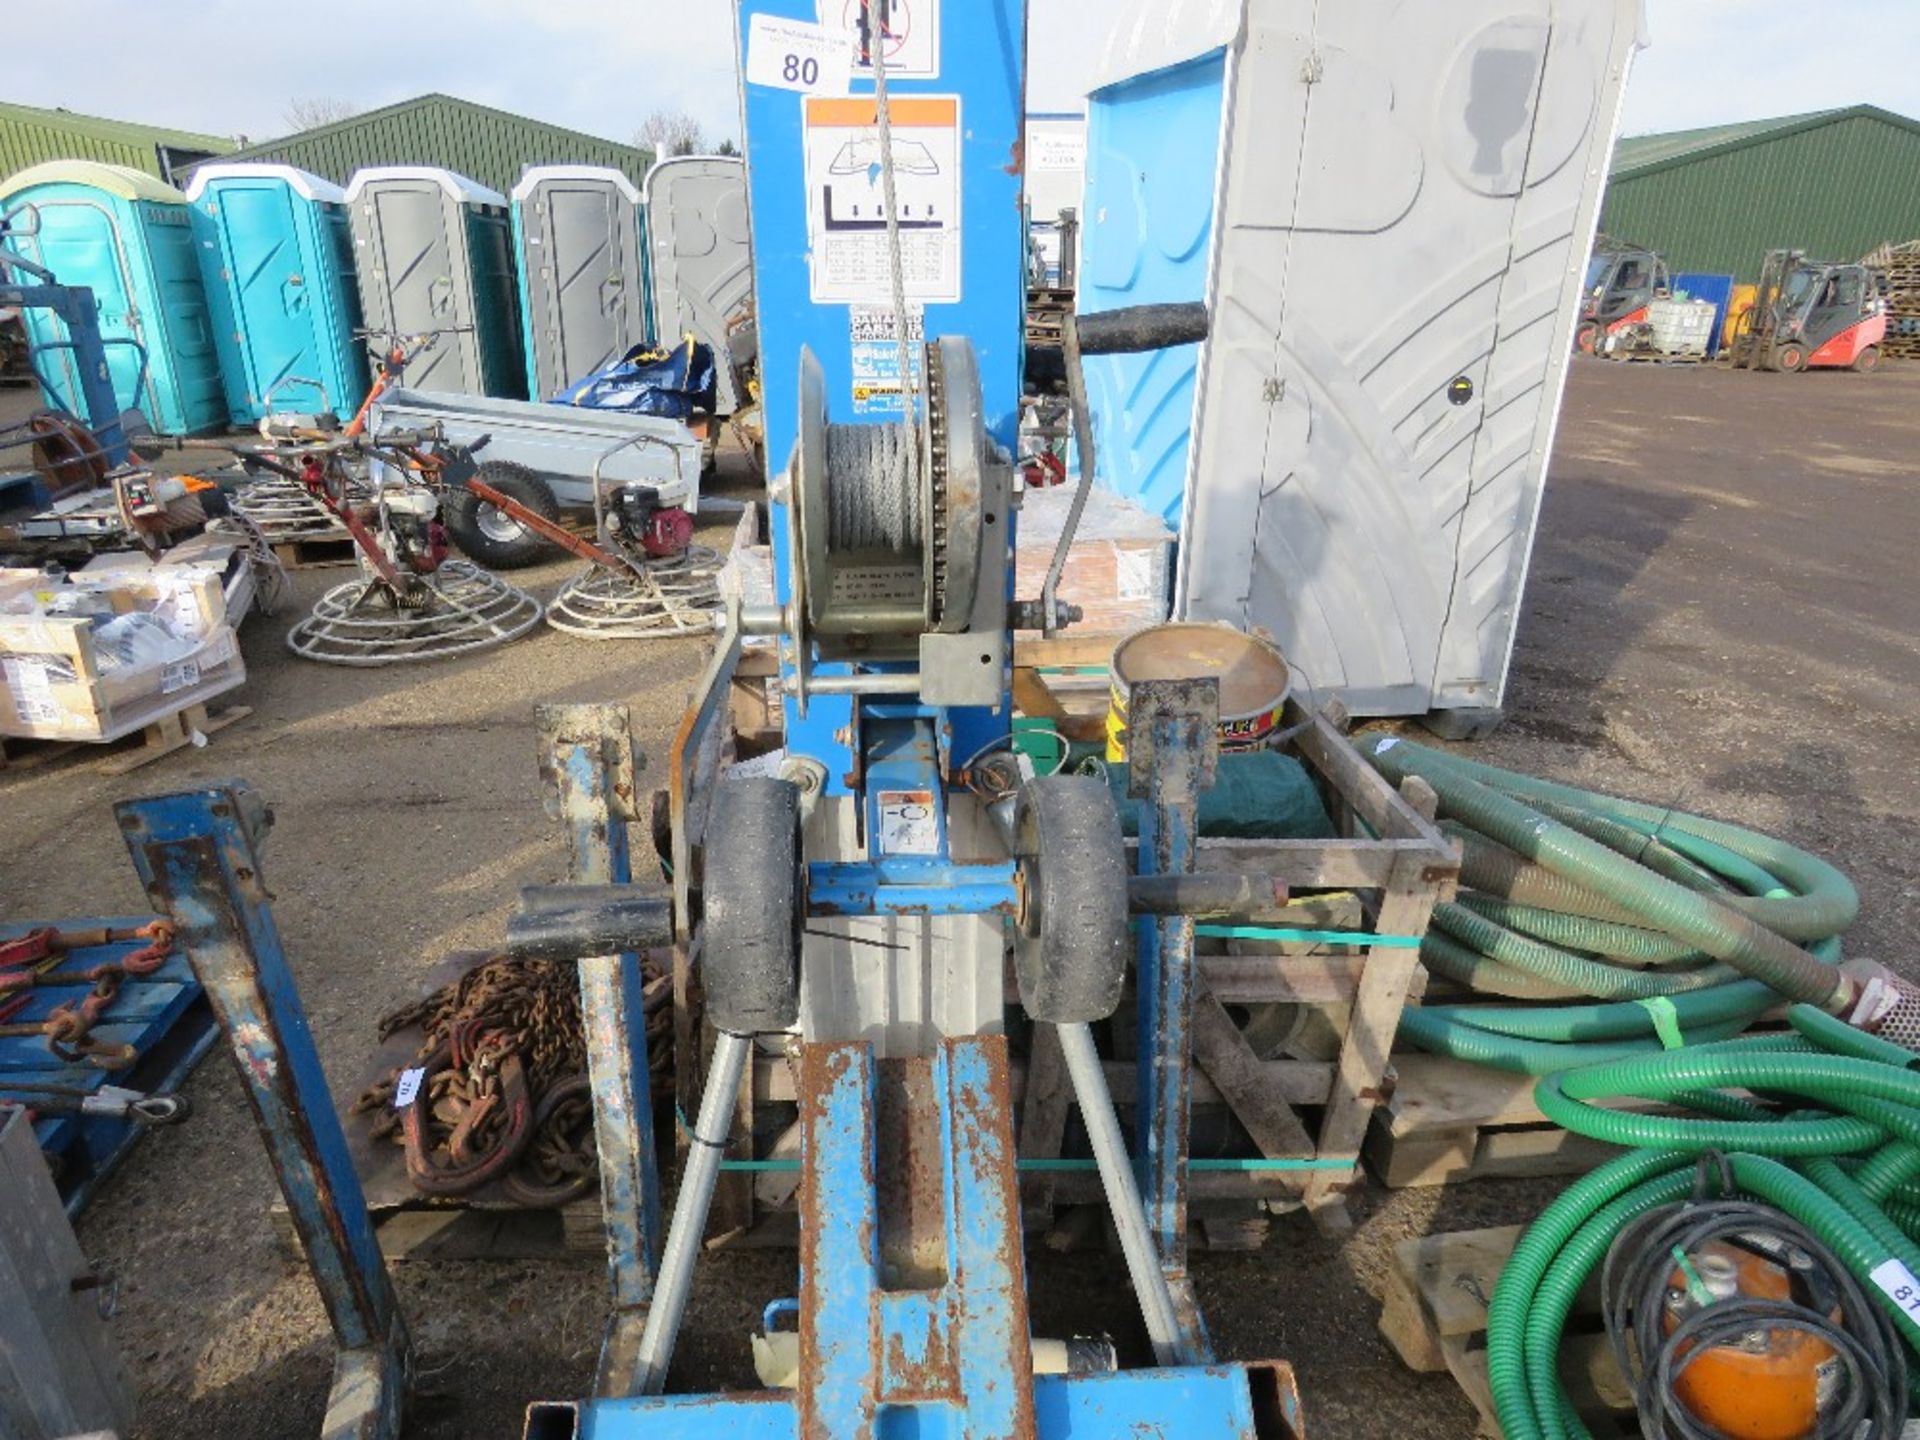 GENIE SLA10 MANUAL OPERTED HOIST / LIFT UNIT WITH FORKS. DIRECT FROM LOCAL COMPANY. - Image 3 of 6